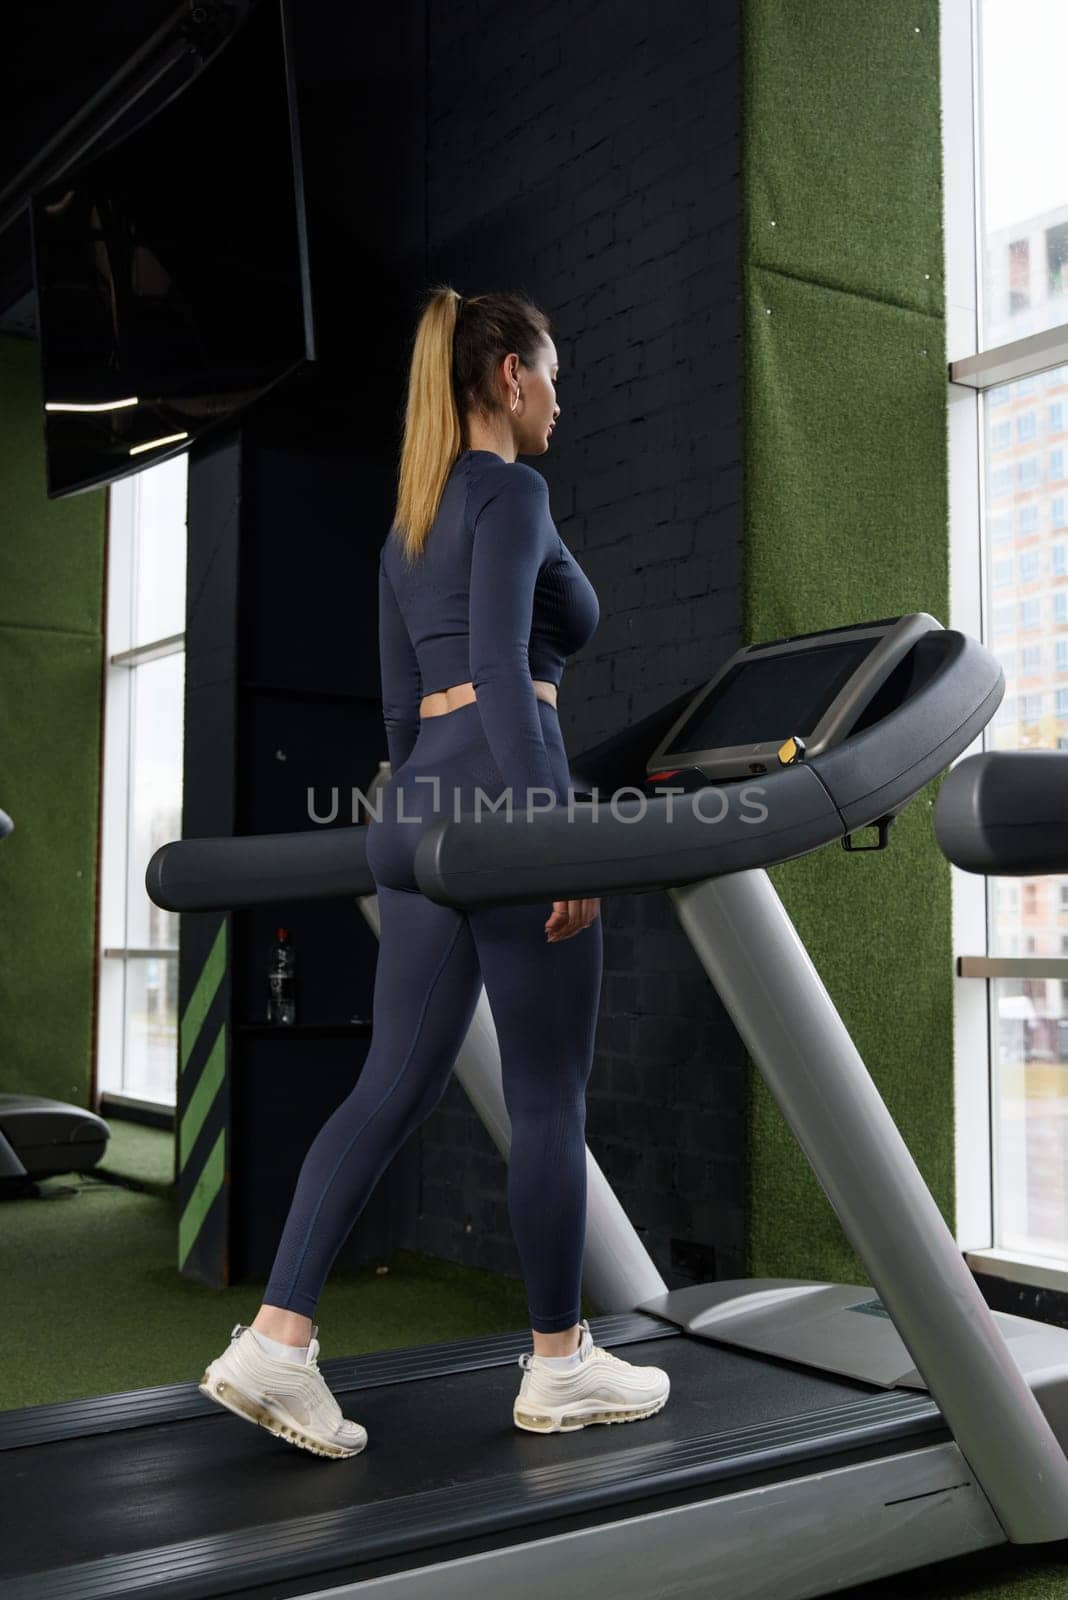 Beautiful muscular woman walking on a treadmill. wearing blue leggins and long sleeve top by Ashtray25